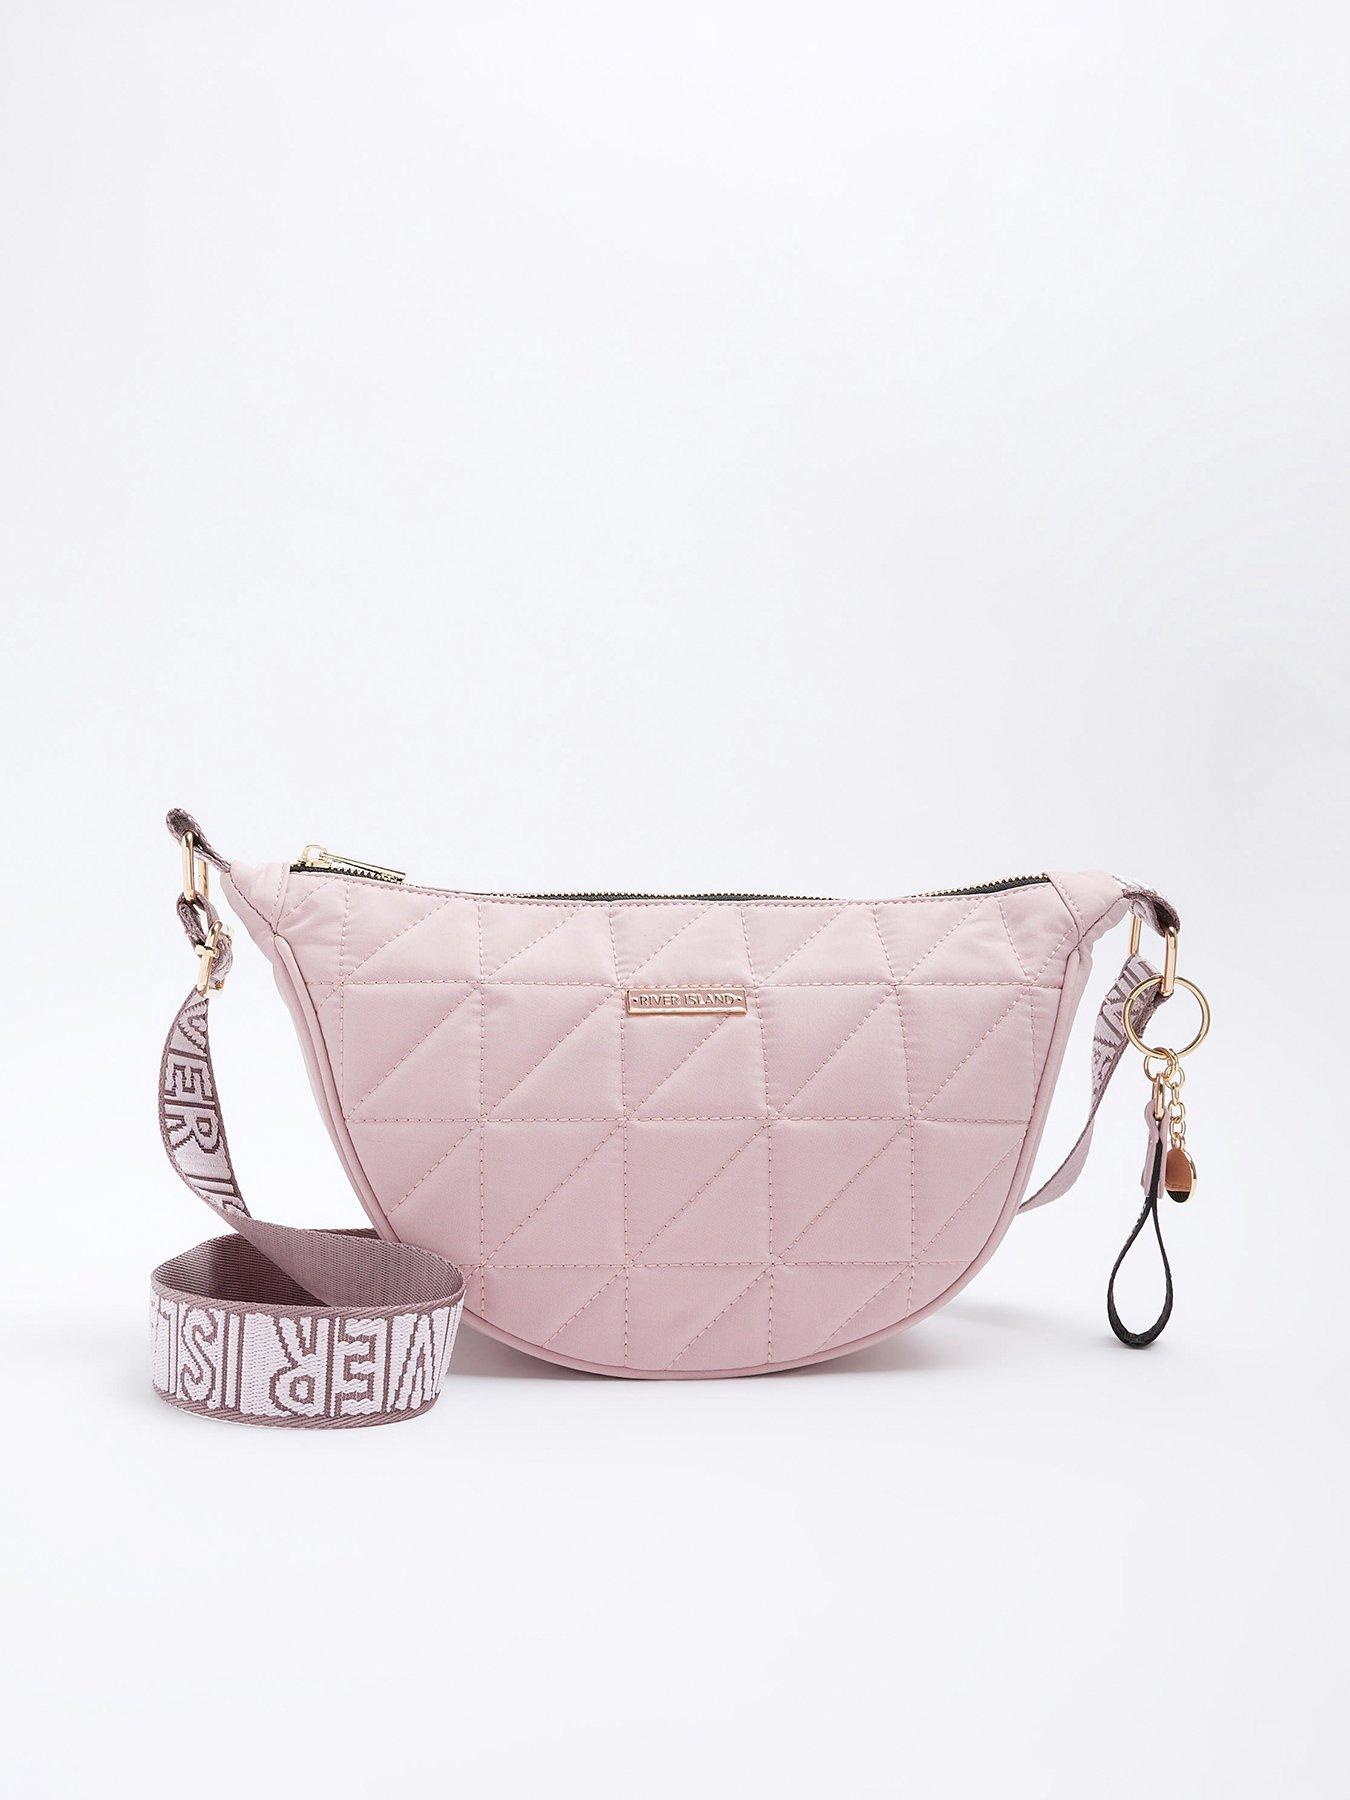 River Island Red Embossed Weave Purse in Pink | Lyst UK